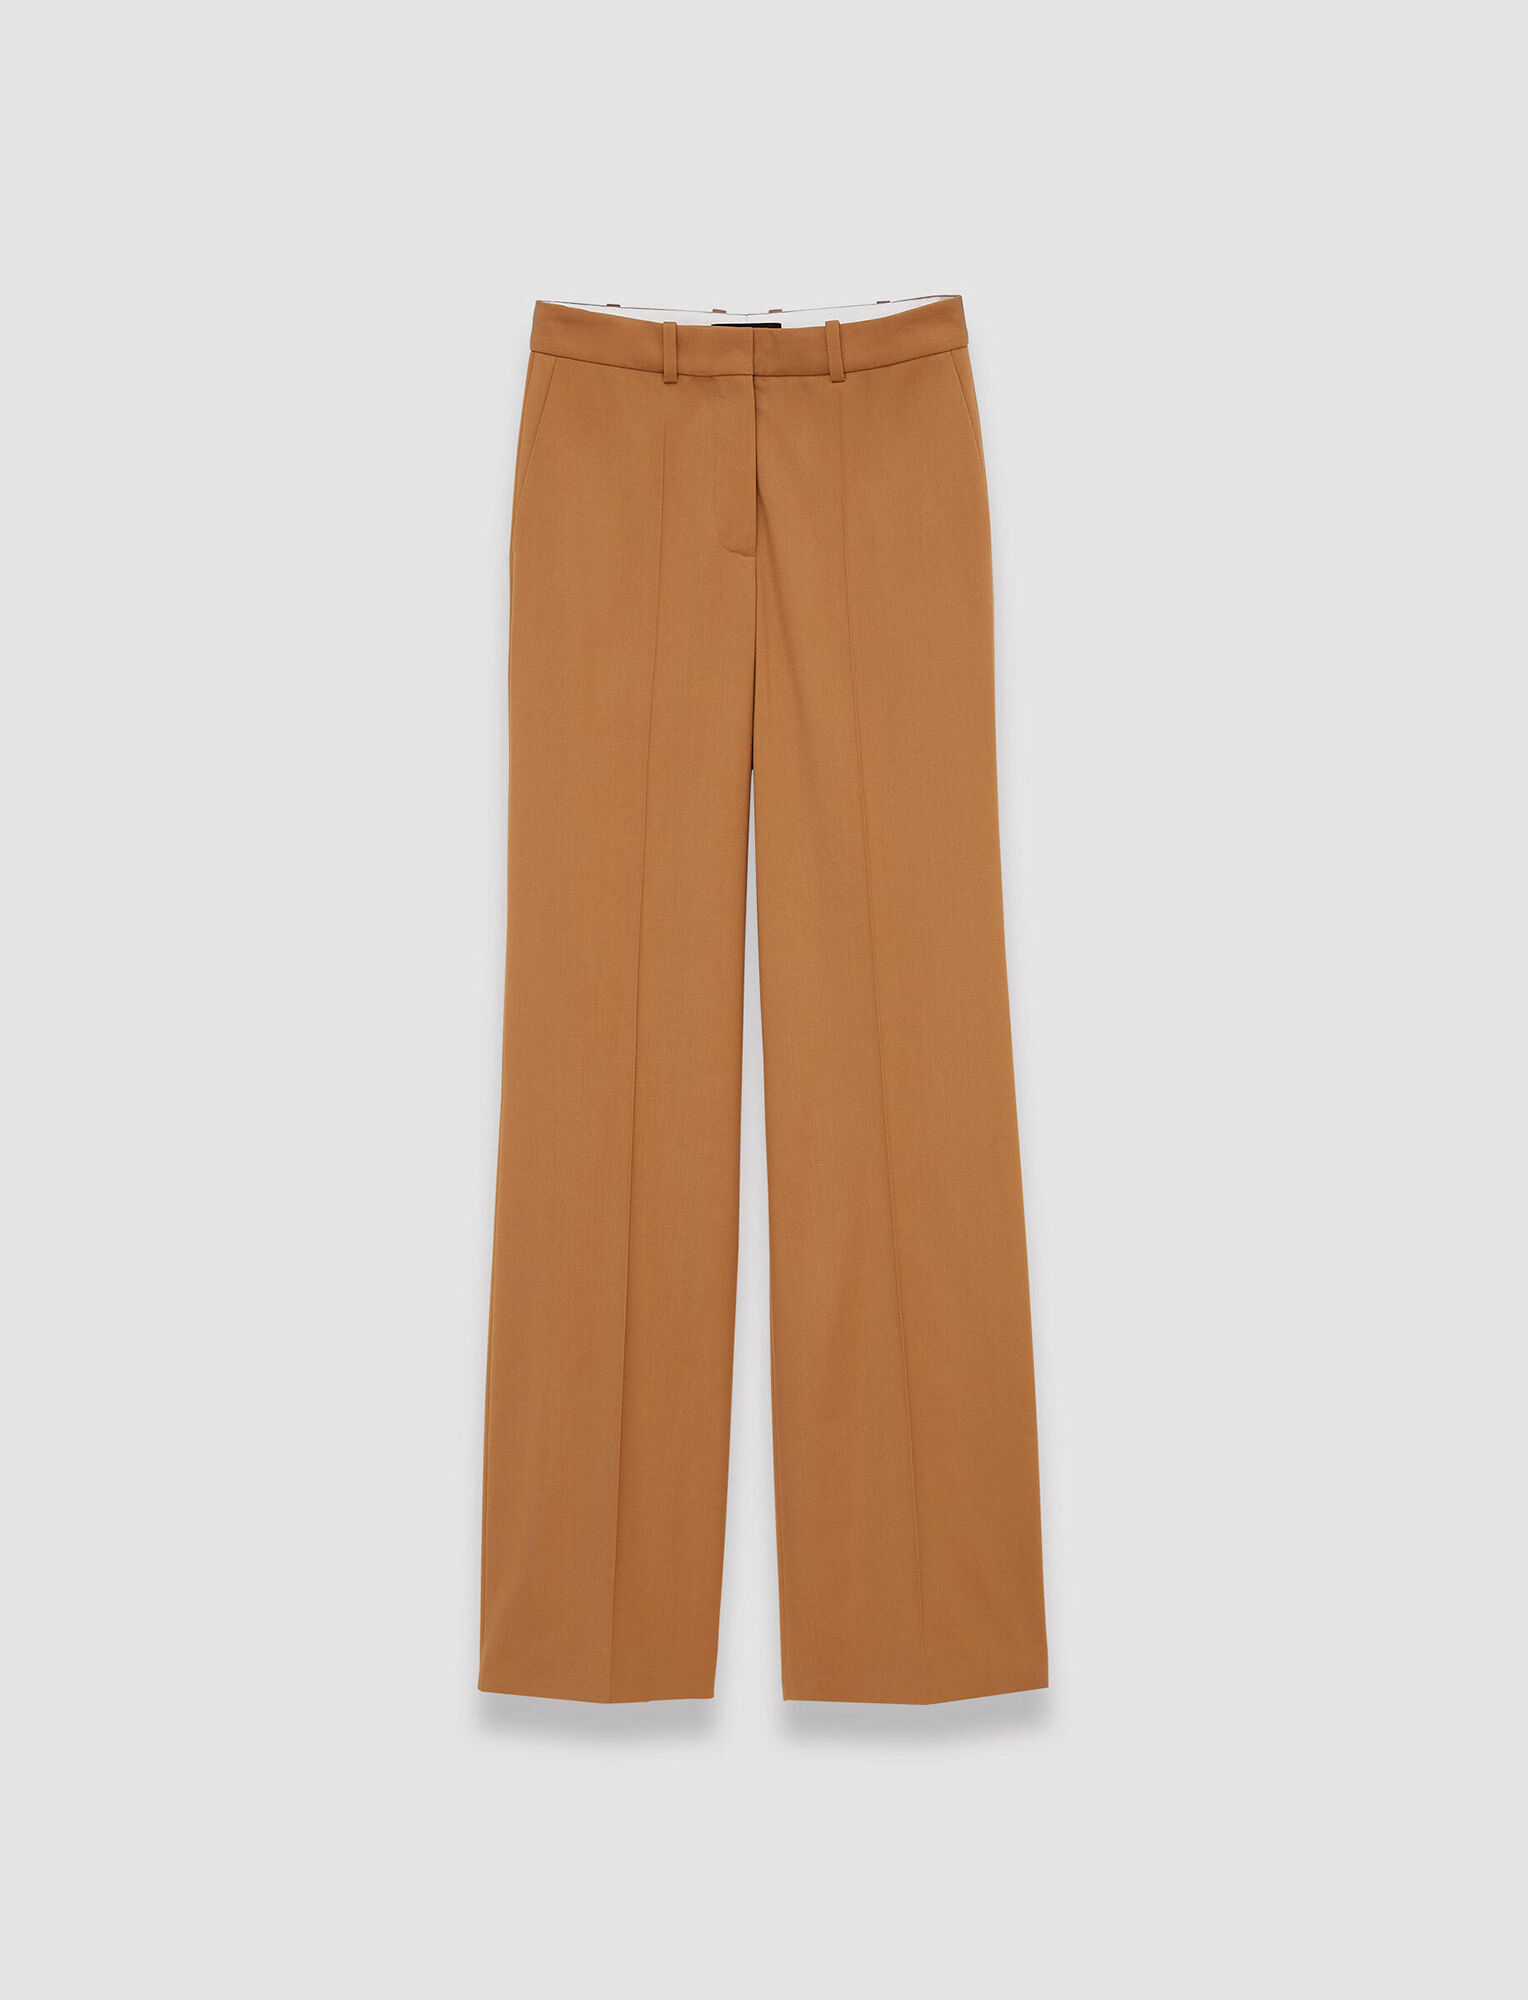 Joseph, Tailoring Wool Stretch Morissey Trousers, in Clay